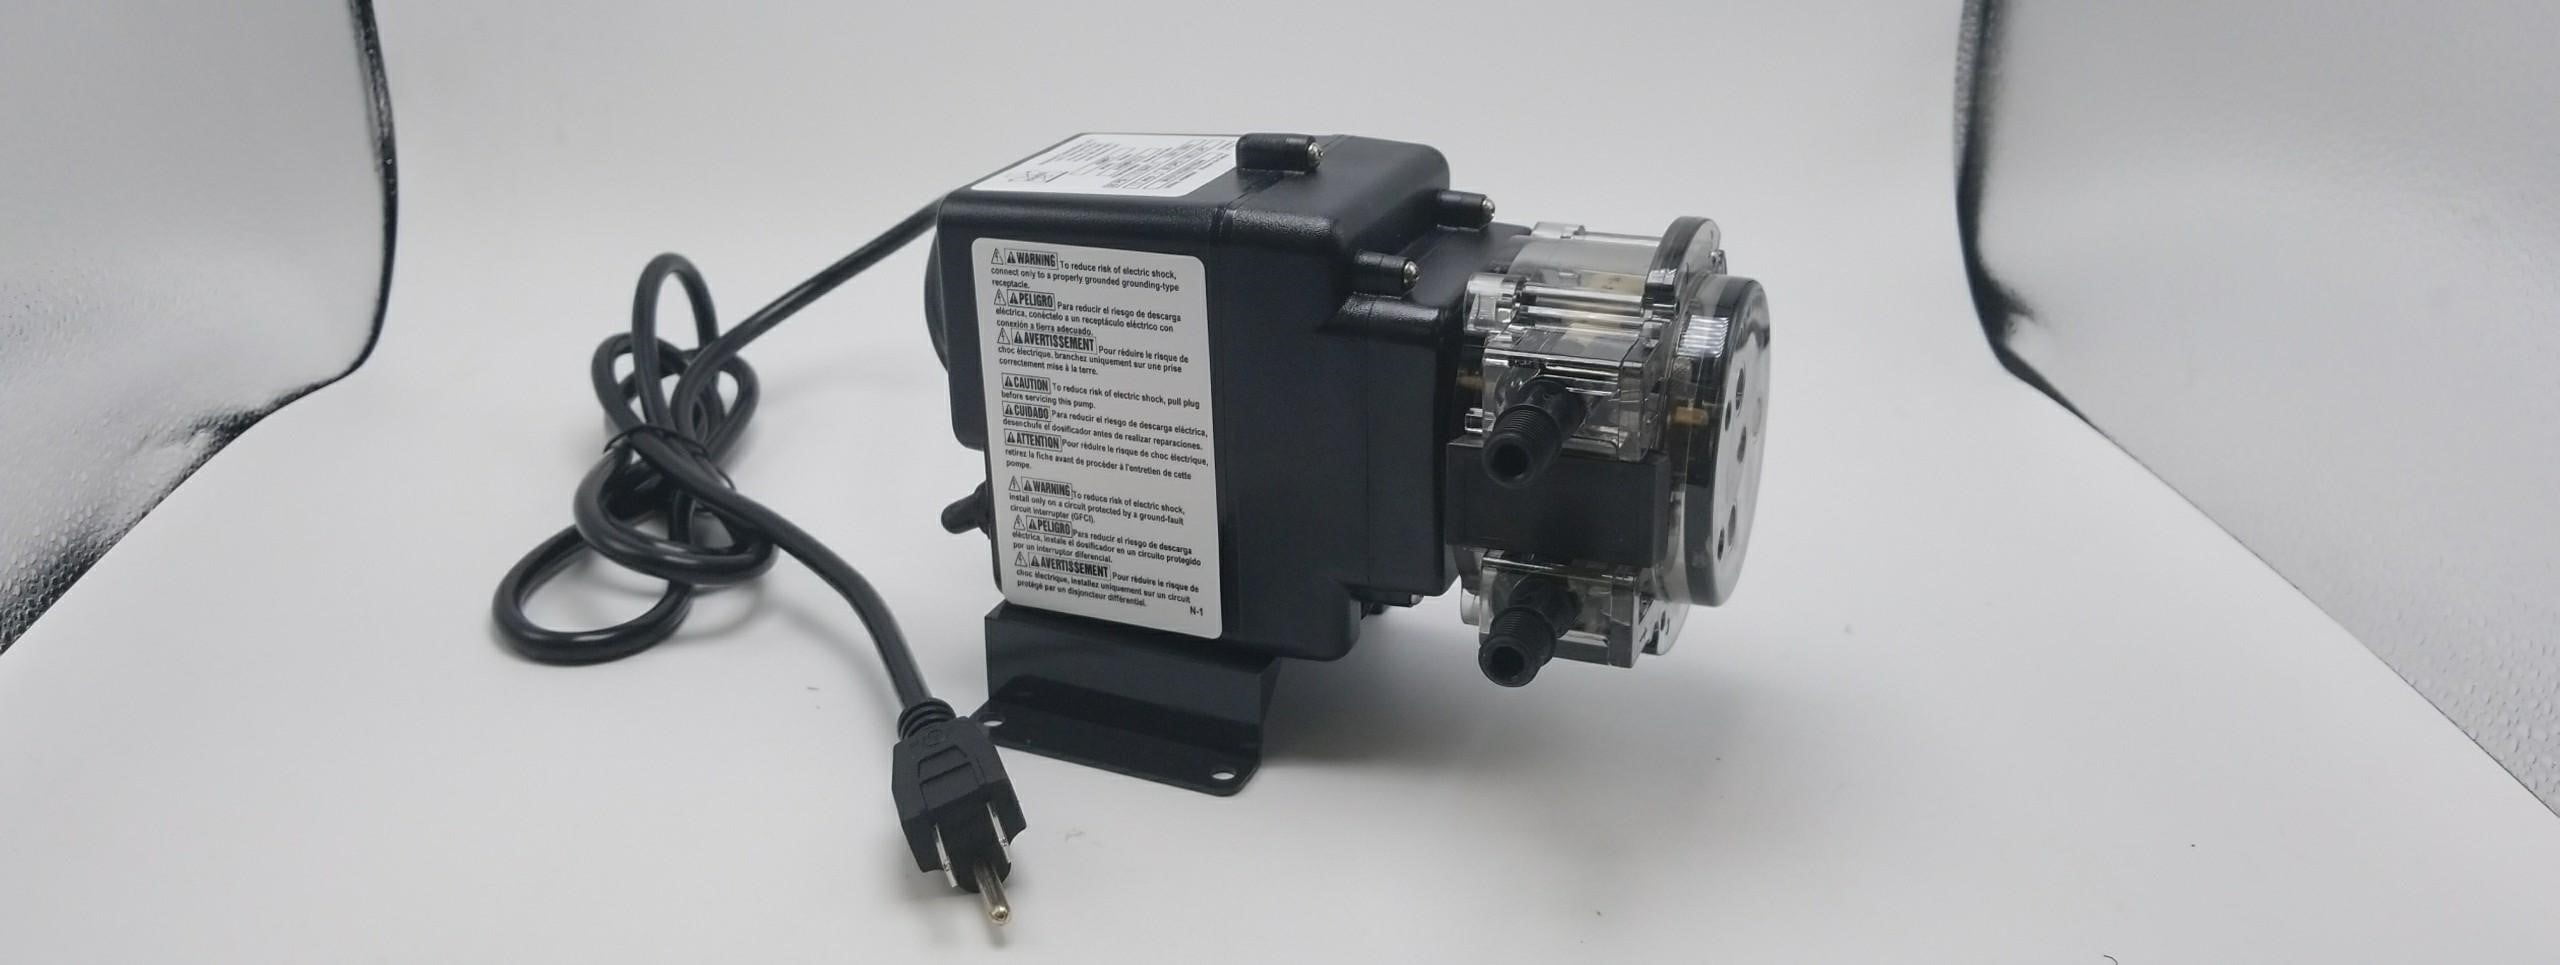 Stenner Pump 45mp5 - Ideal Chlorine Injection Pump Rated at 25 psi Model number 45MFL5A3S 120 Volts Stenner Peristaltic Pump Fixed Head Rated at 50 gpd adjustable head 